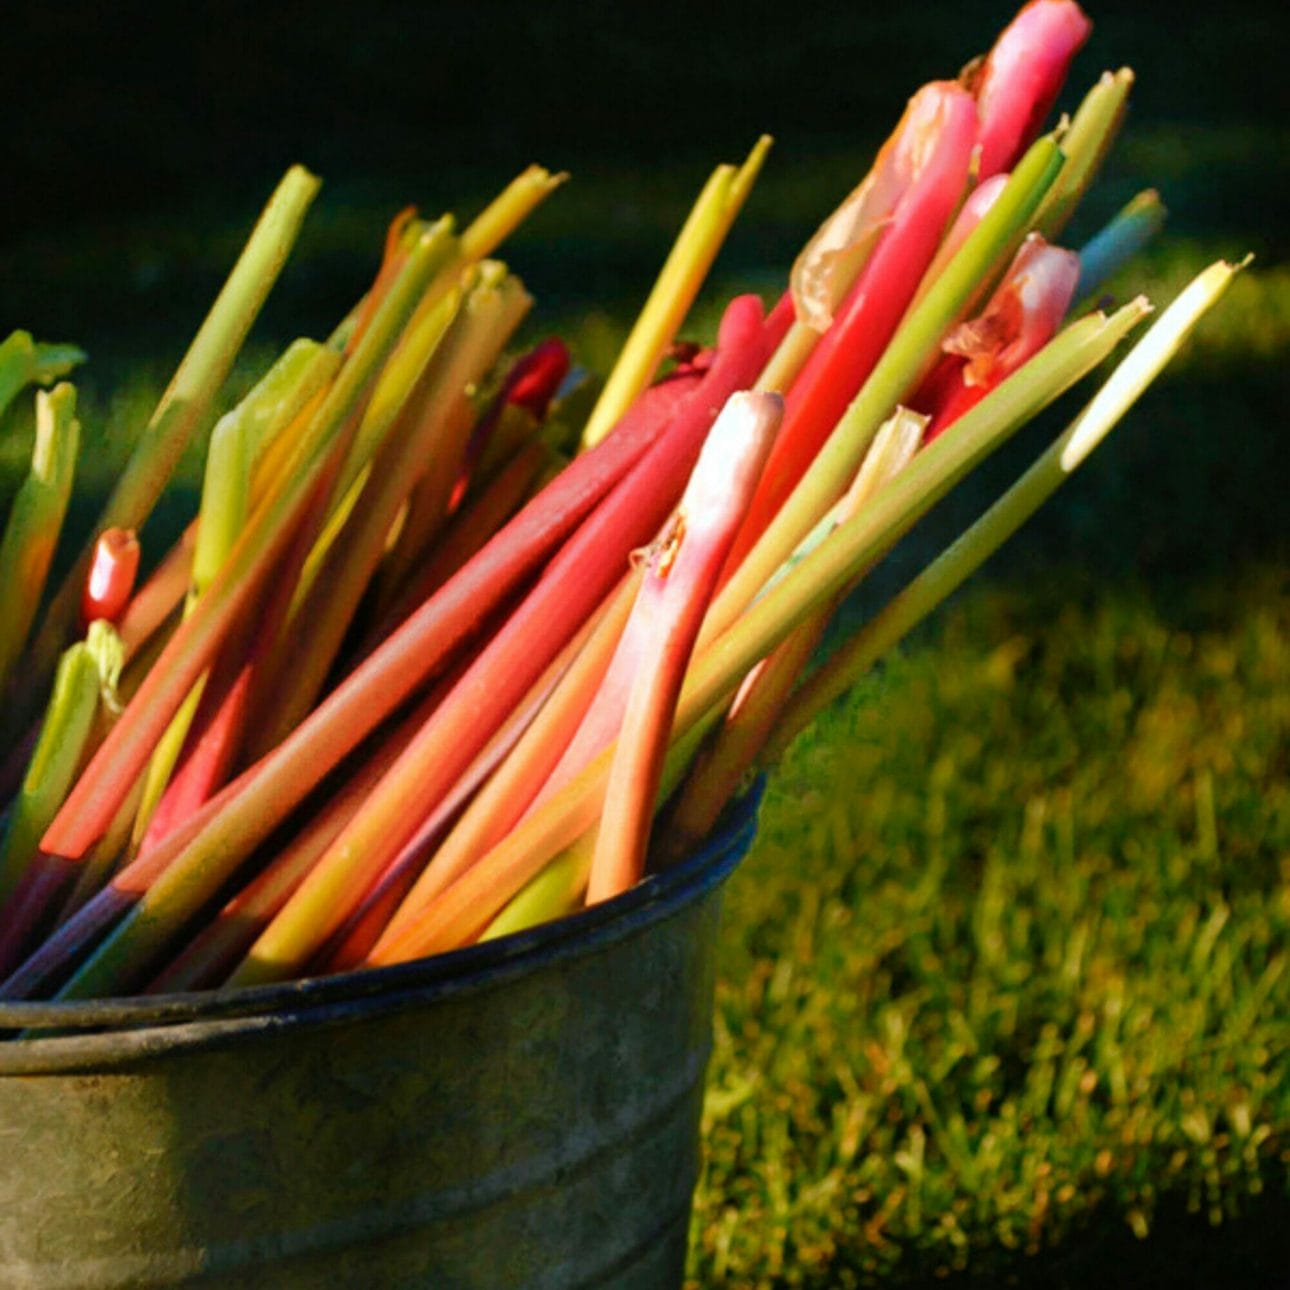 rhubarb stems in pail at sunset